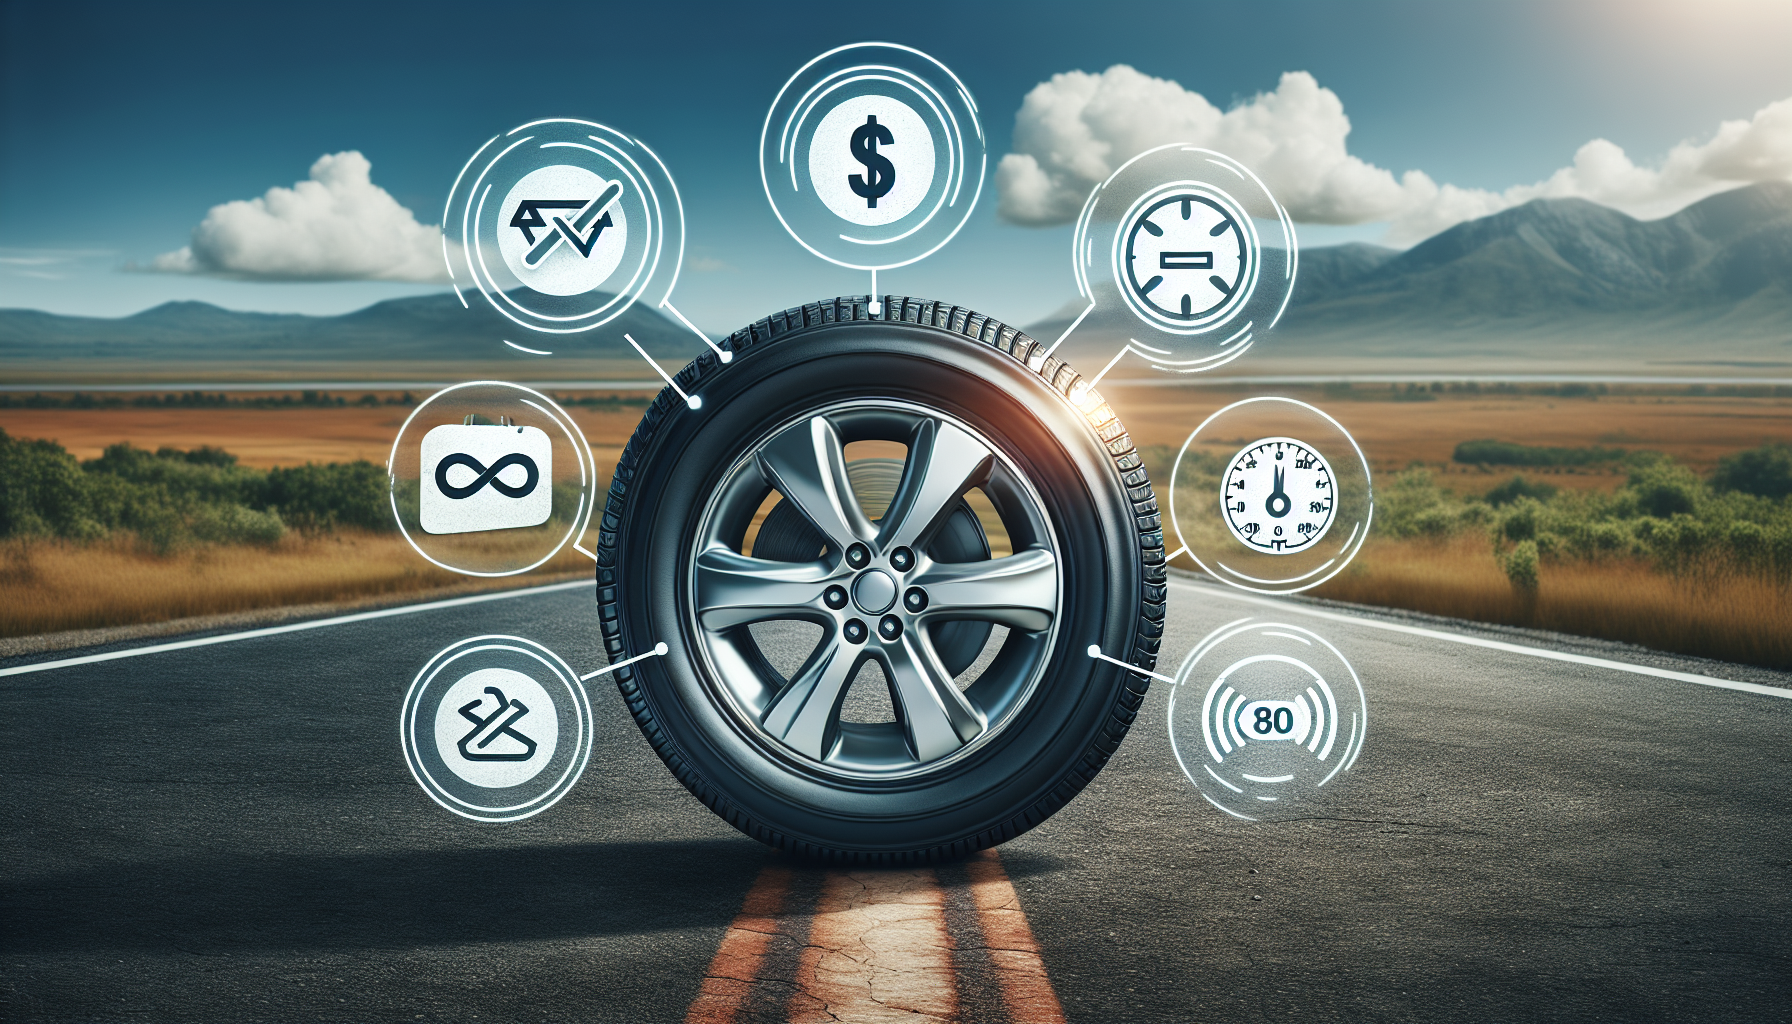 Tire and wheel protection plan benefits